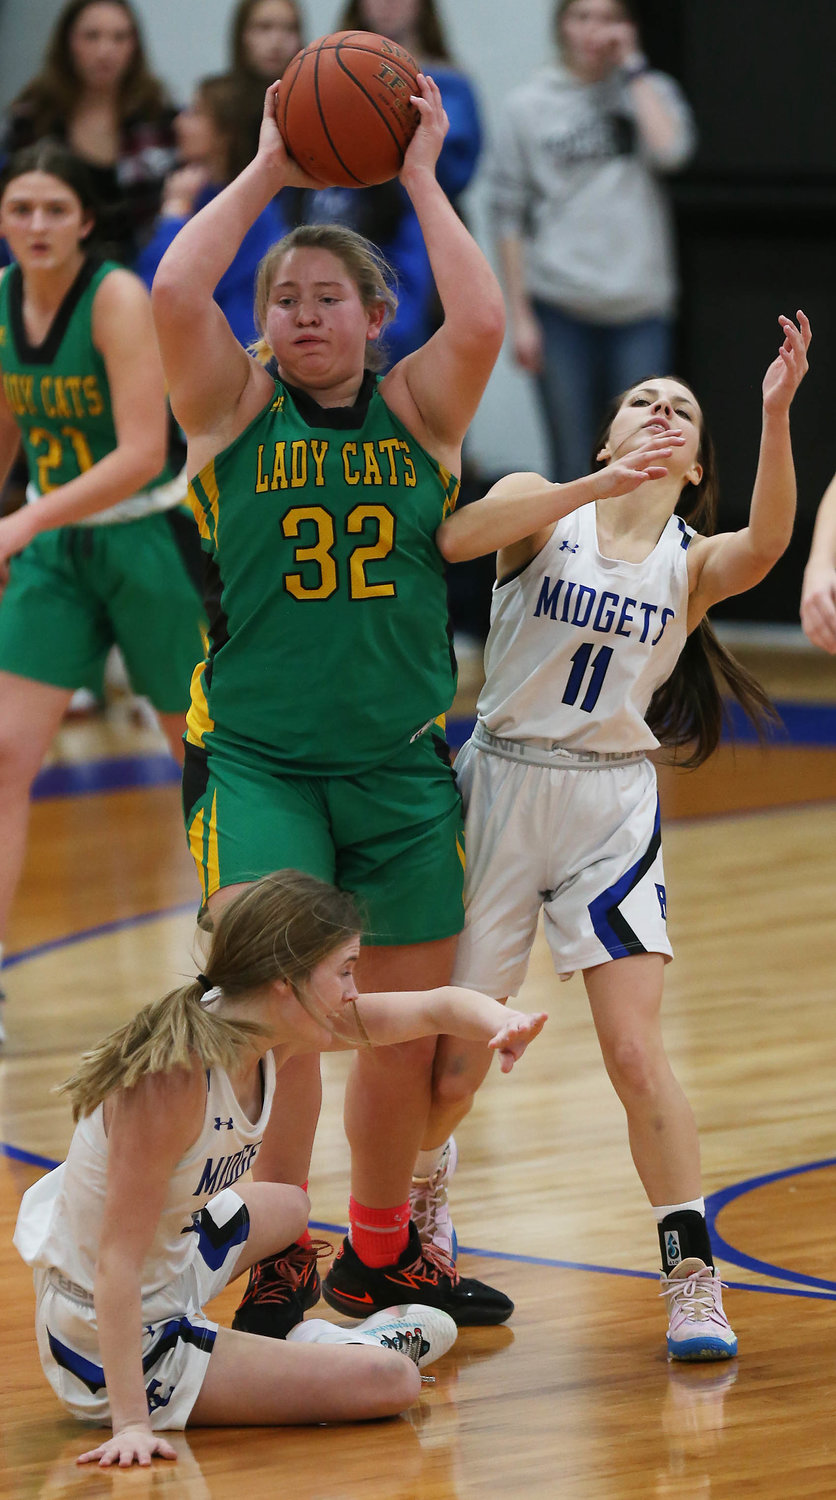 Basketball action between Putnam County Midgets and Milan Wildcats Friday evening at Putnam County High School...